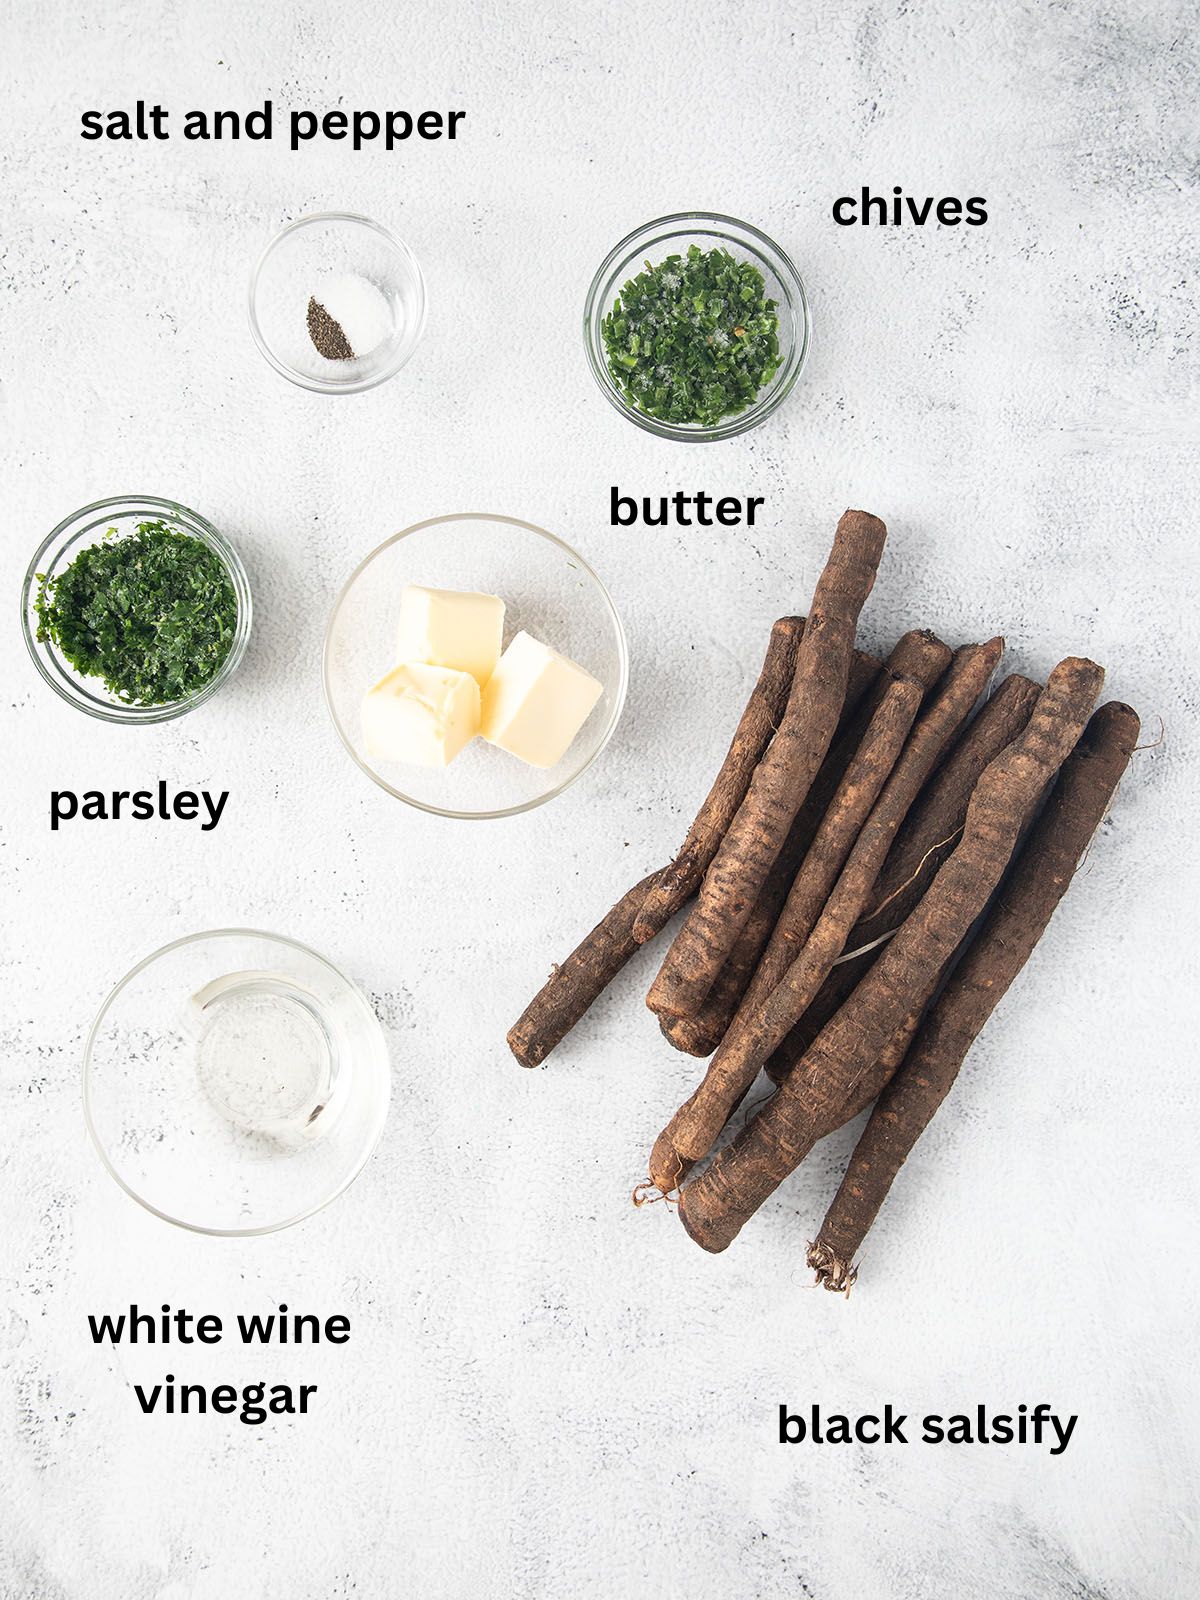 listed ingredients for cooking black salsify in a pan.